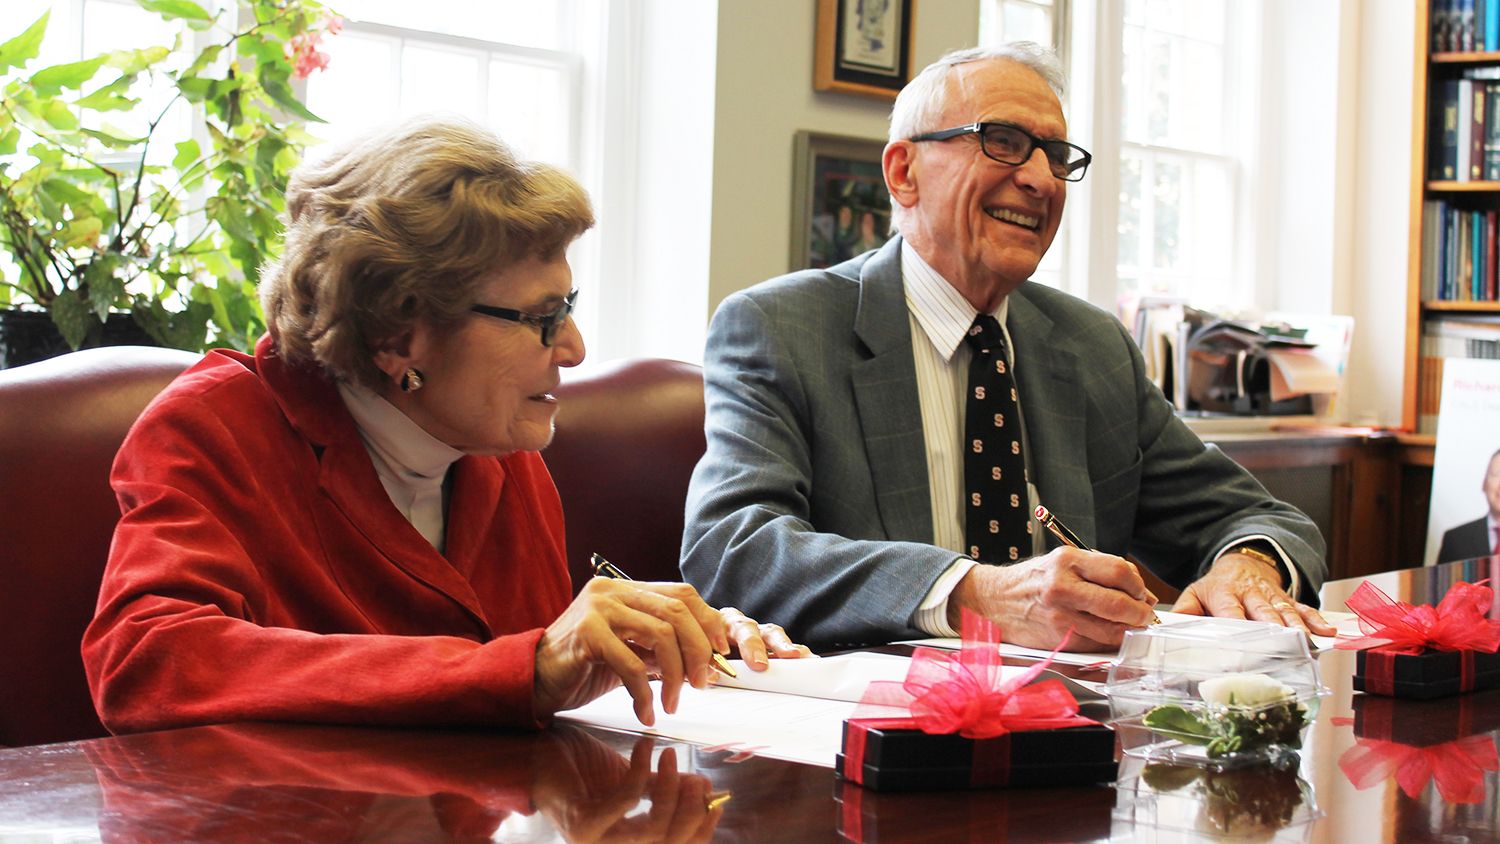 Marilyn and Charles Stuber, seated at a table, signing agreement